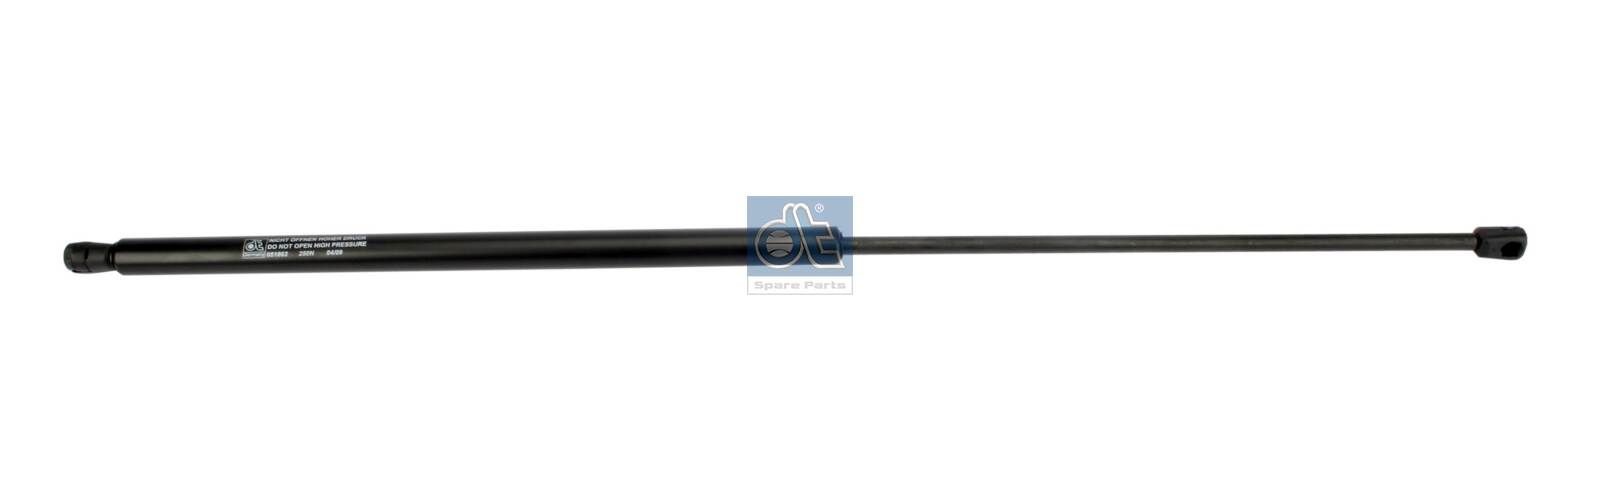 437155 DT Spare Parts 250N, 785 mm Gas Spring 1.23257 buy